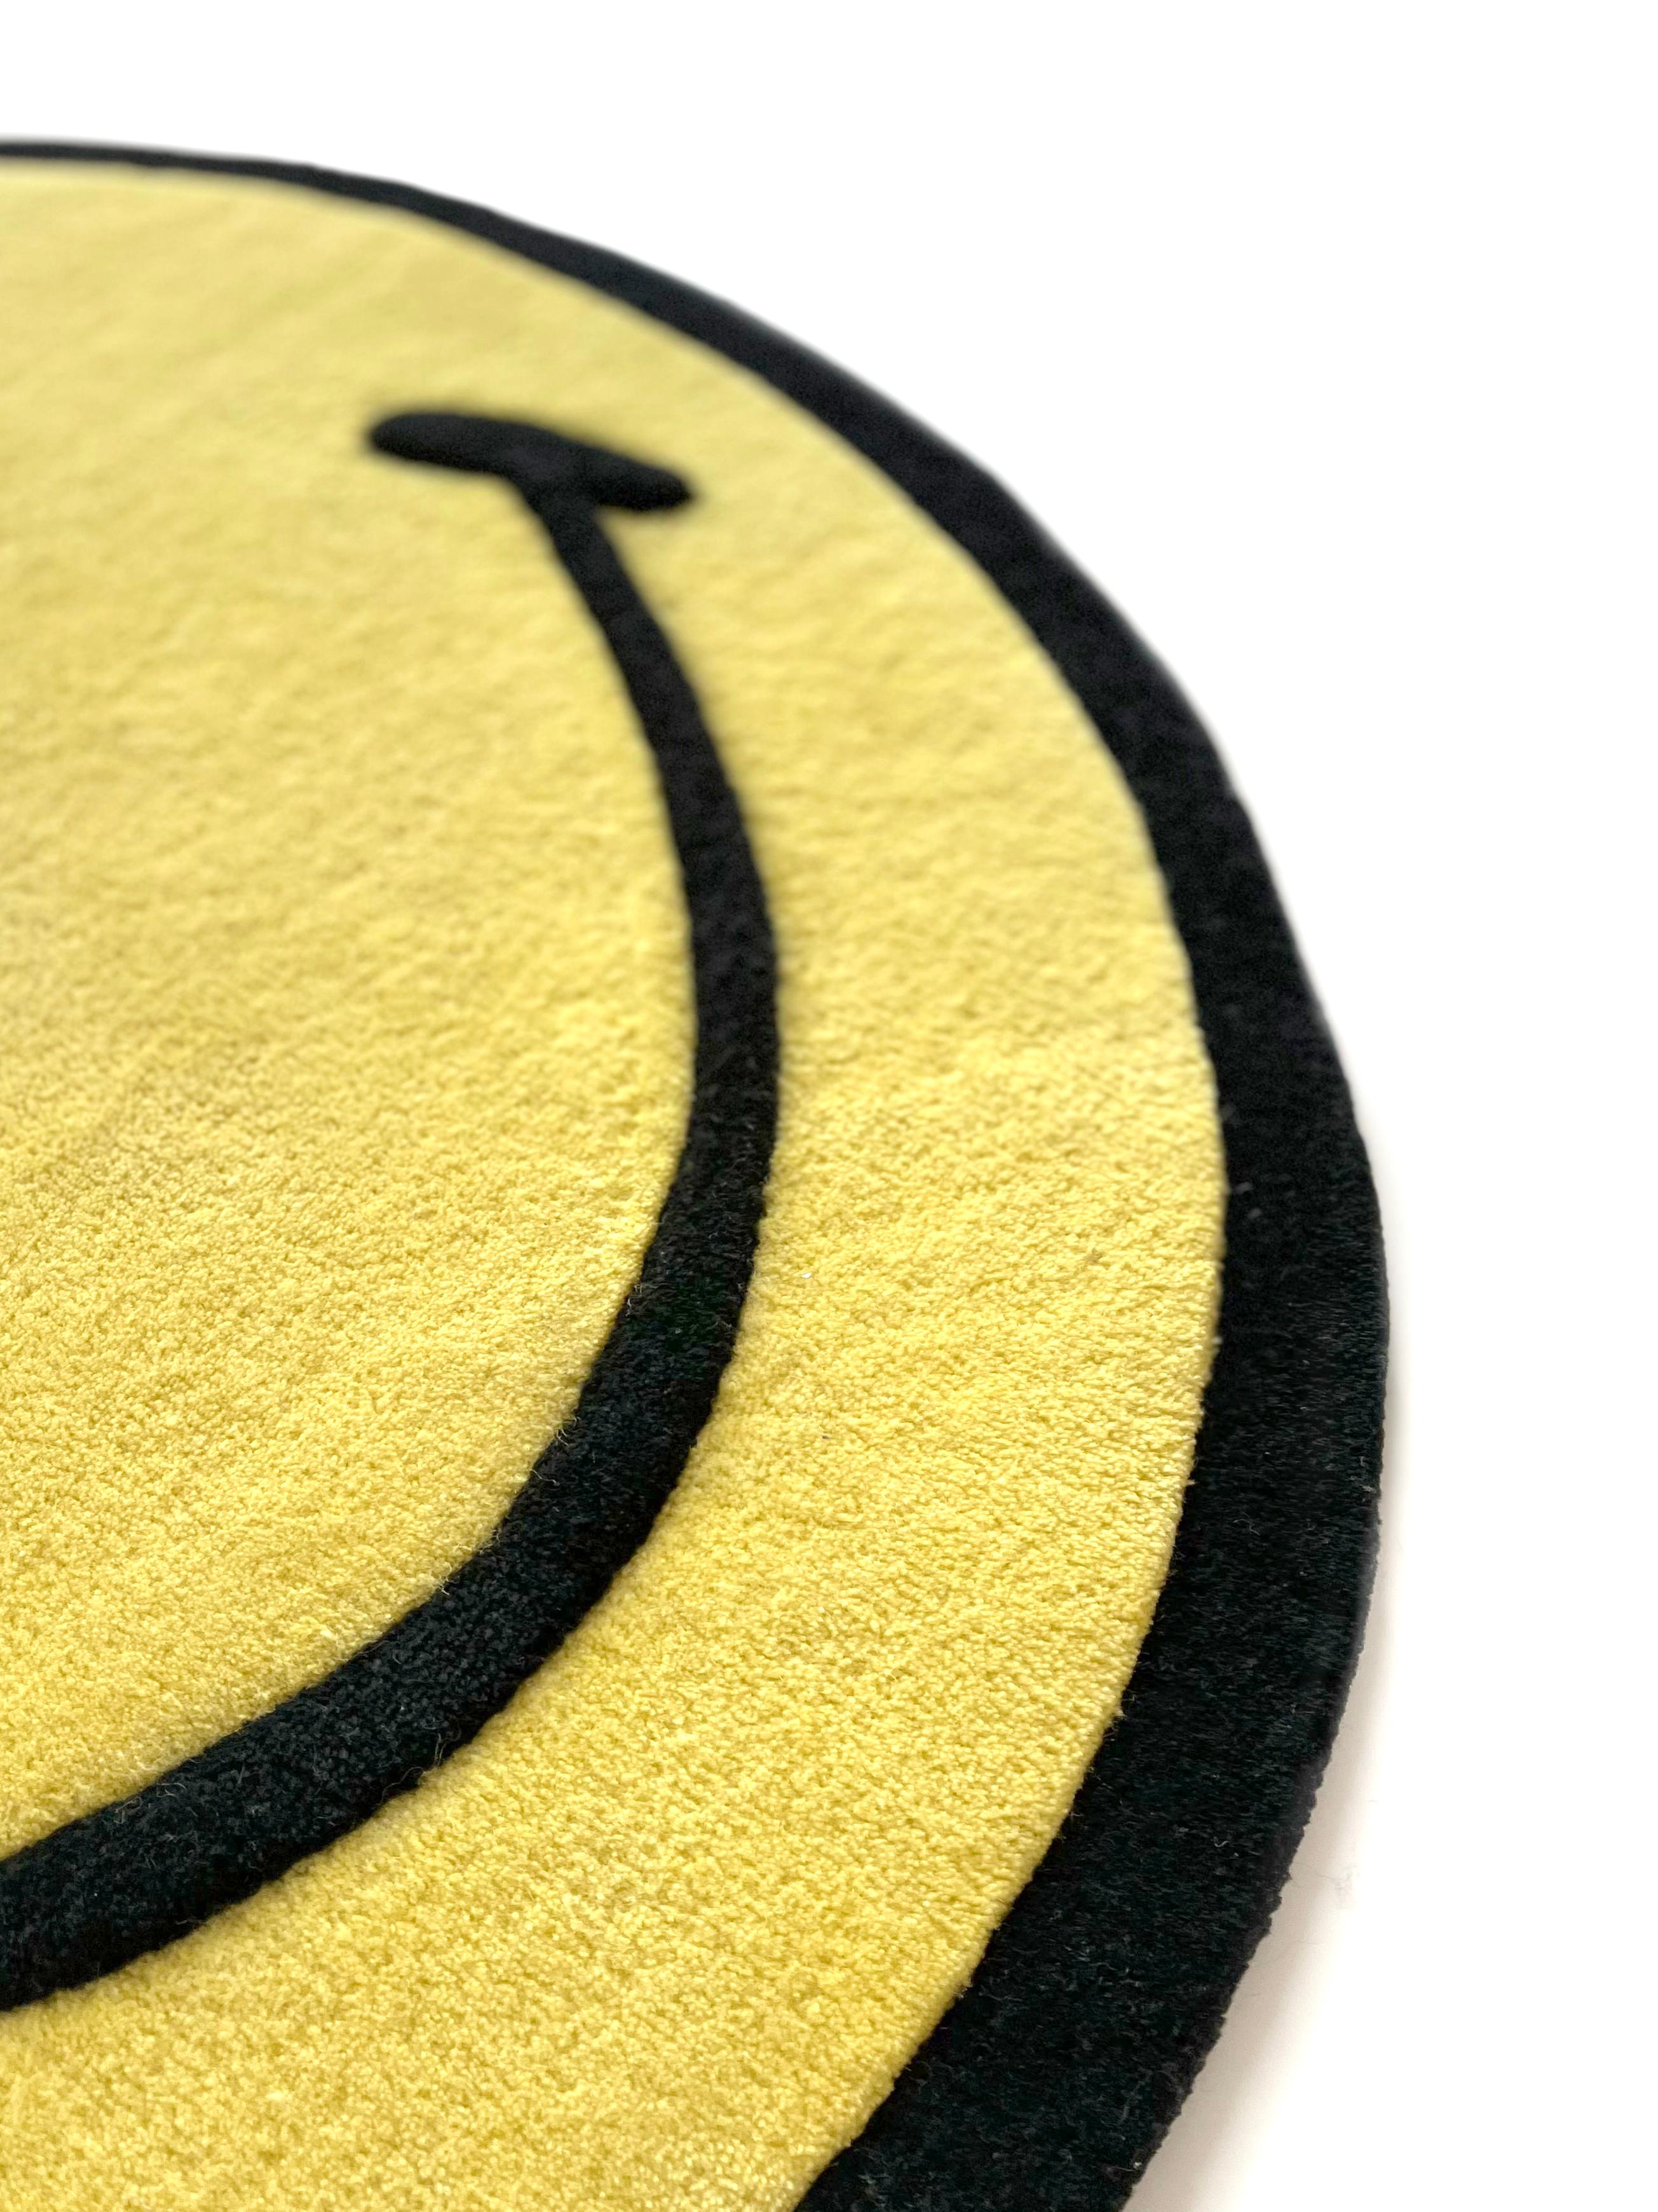 Minimalist MAISON DEUX - Smiley Rug Yellow, 3D Hand Tufted, The Original For Sale